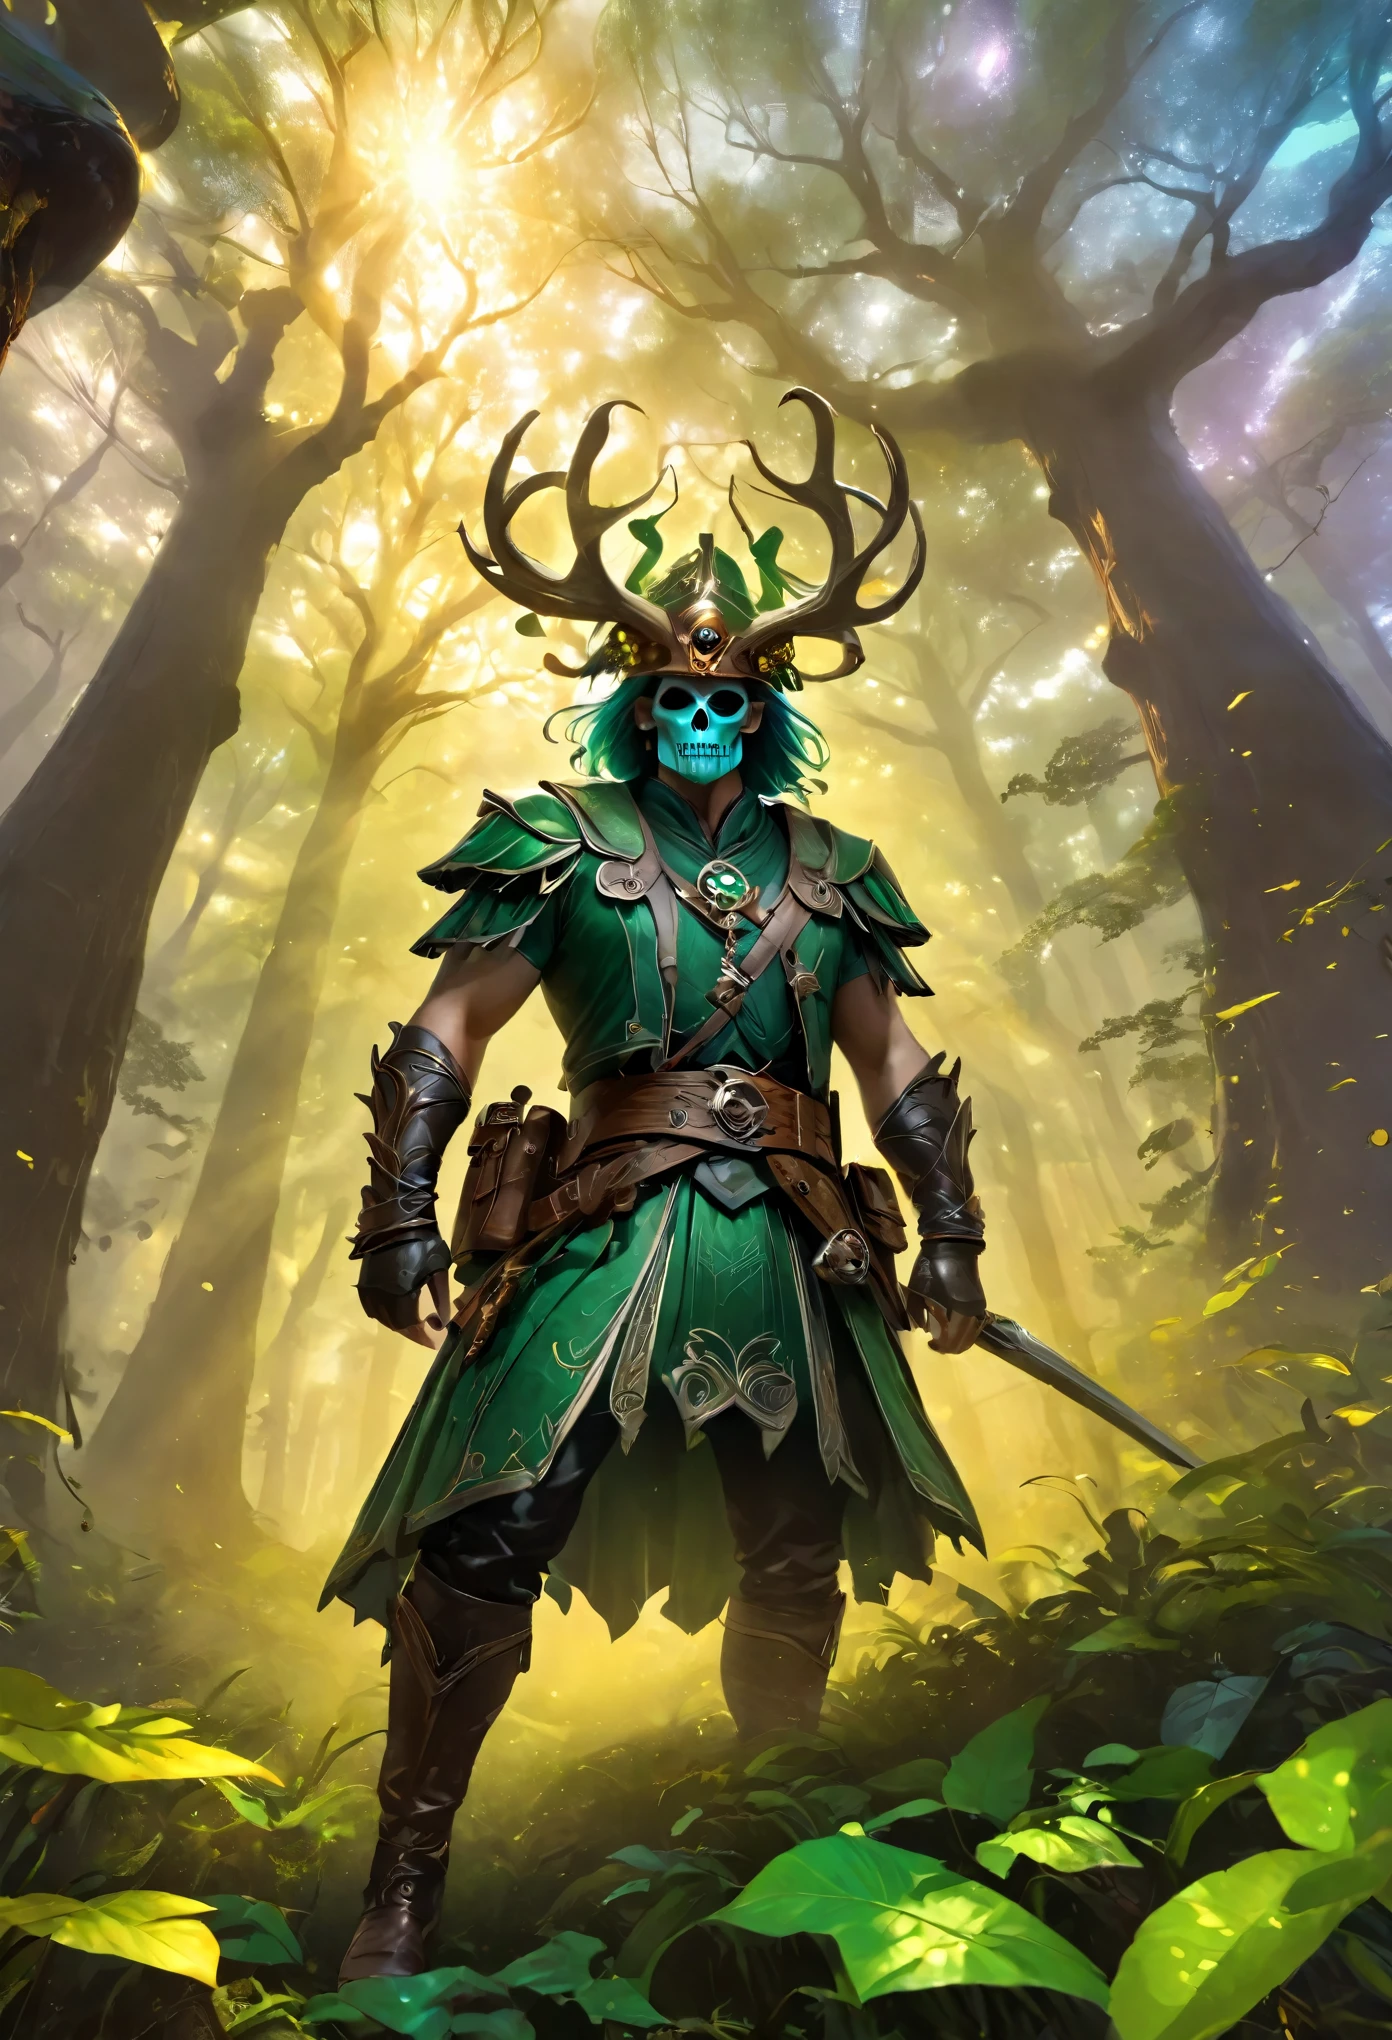 foreground: 1.3, (Masterpiece: 1.5), (Best Quality: 1.6), (ultra high resolution: 1.4), strong and robust green ogre, dynamic pose, with shoulder pads and leather bones, large and sharp fangs, leather belt with a skull, loincloth, detailed illustration, intricate elves, idyllic and magical in the forest: 1.5, landscape, colores Vibrants, sunrise, sun rays passing through the trees, leaves falling from the trees, dew on leaves and plants, clouds, ( (magical, beautiful, from another world, trees:1.4)), ((Best Quality, Vibrant, 32k, clear, well-defined shadows)).